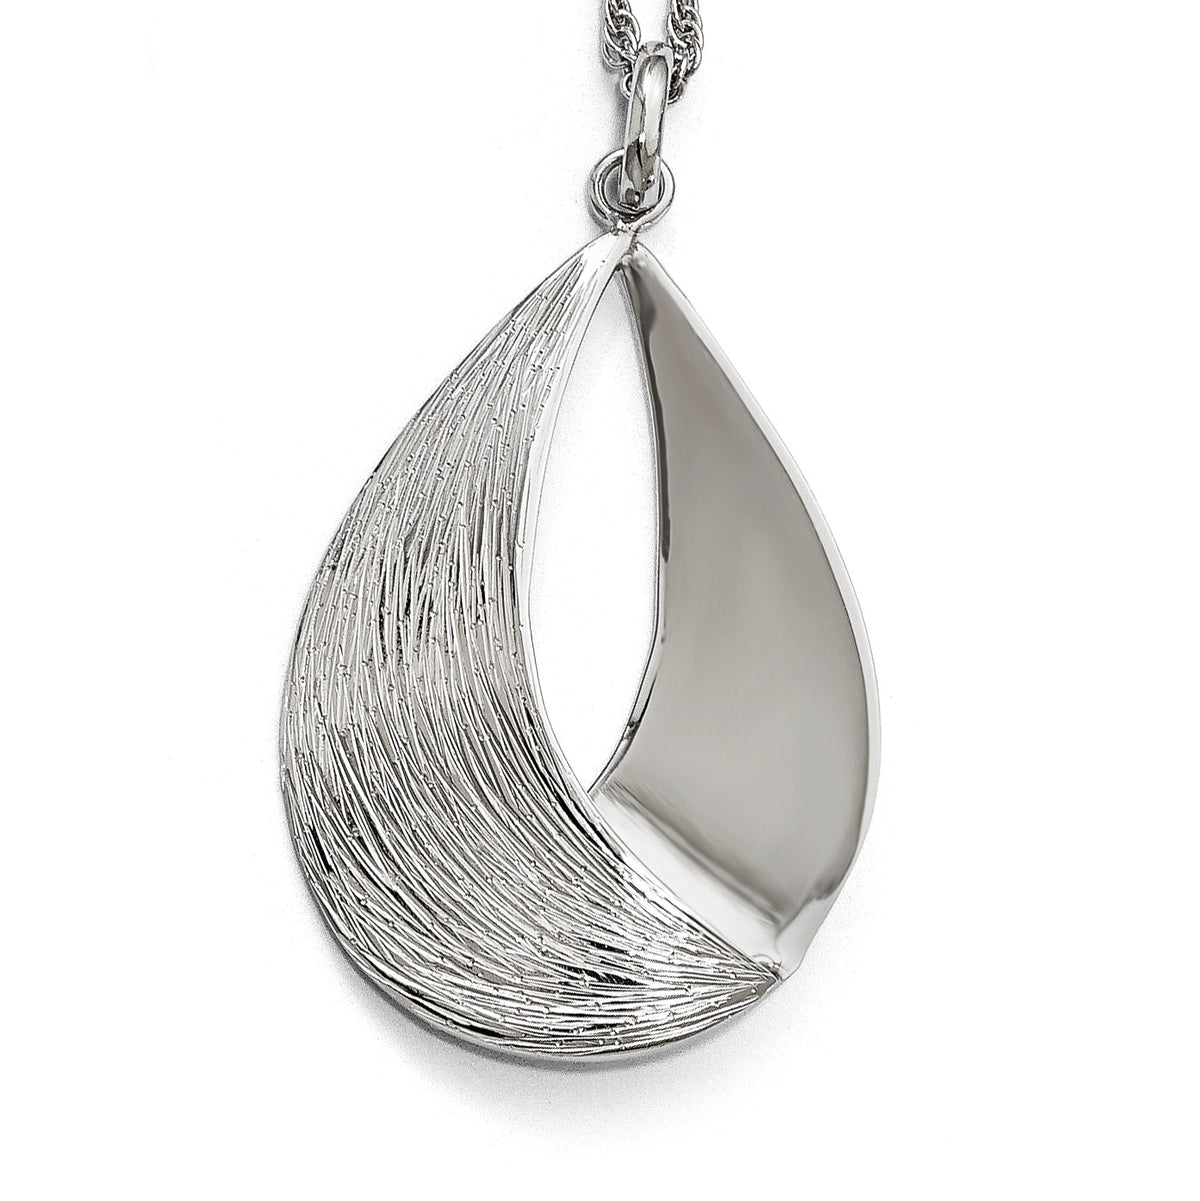 Alternate view of the Sterling Silver Polished and Textured Teardrop Pendant, 25 x 42mm by The Black Bow Jewelry Co.